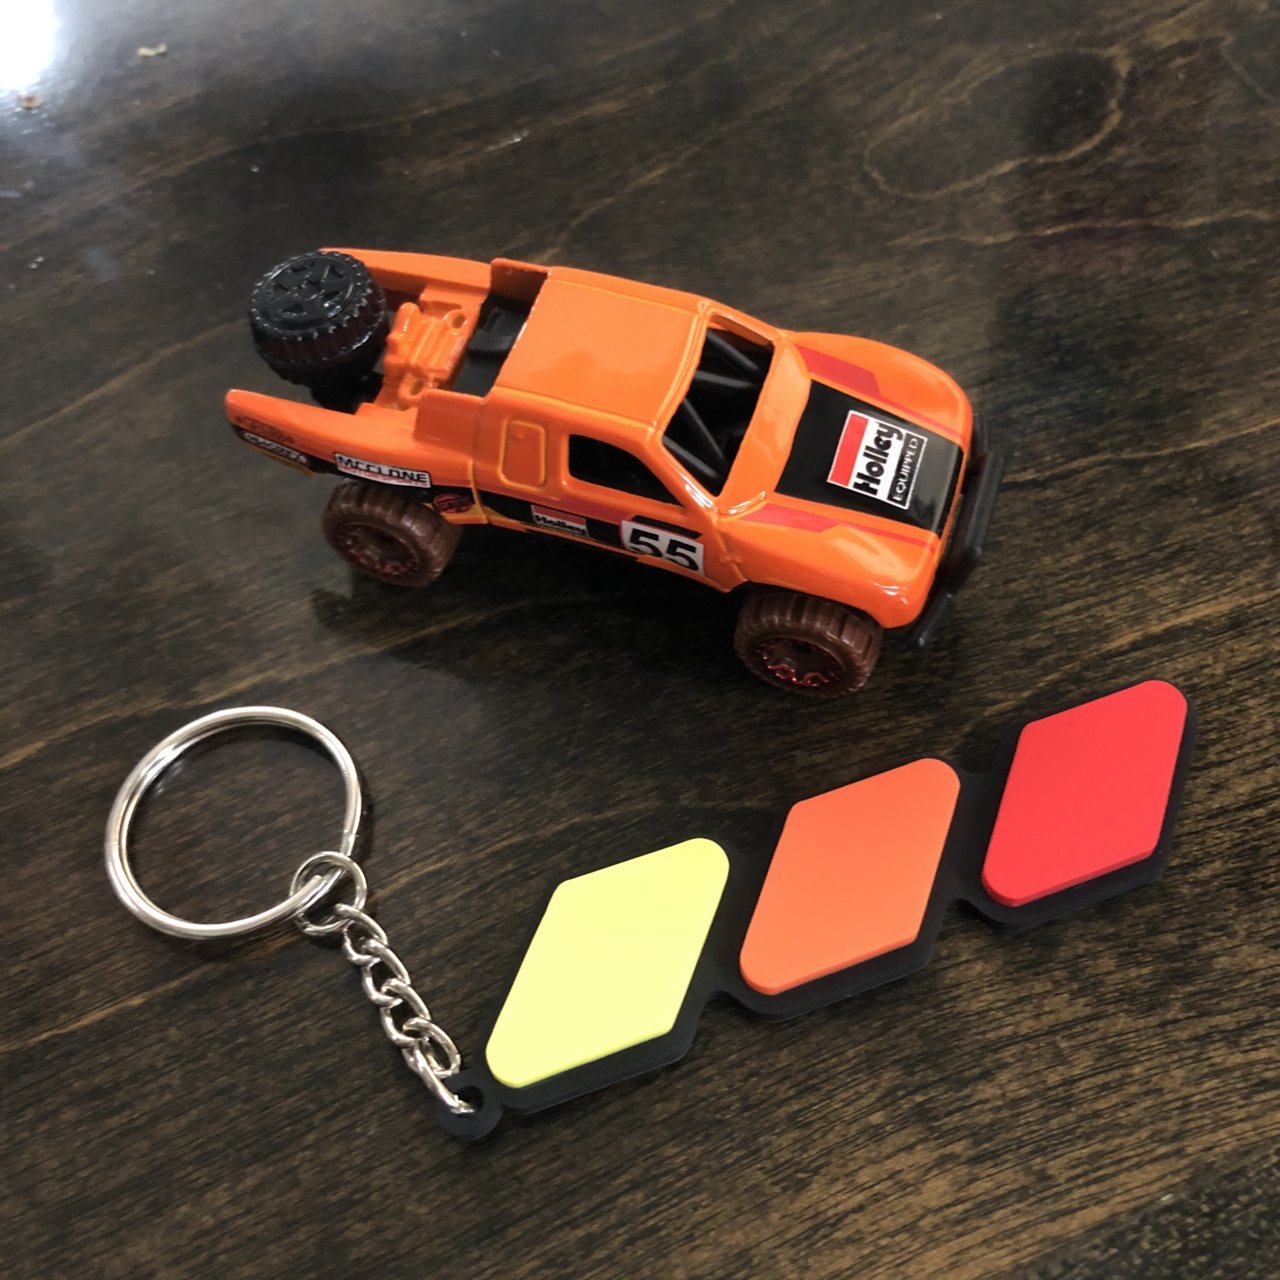 Toyota TriColor Keychain and Hot Wheel Truck.jpg